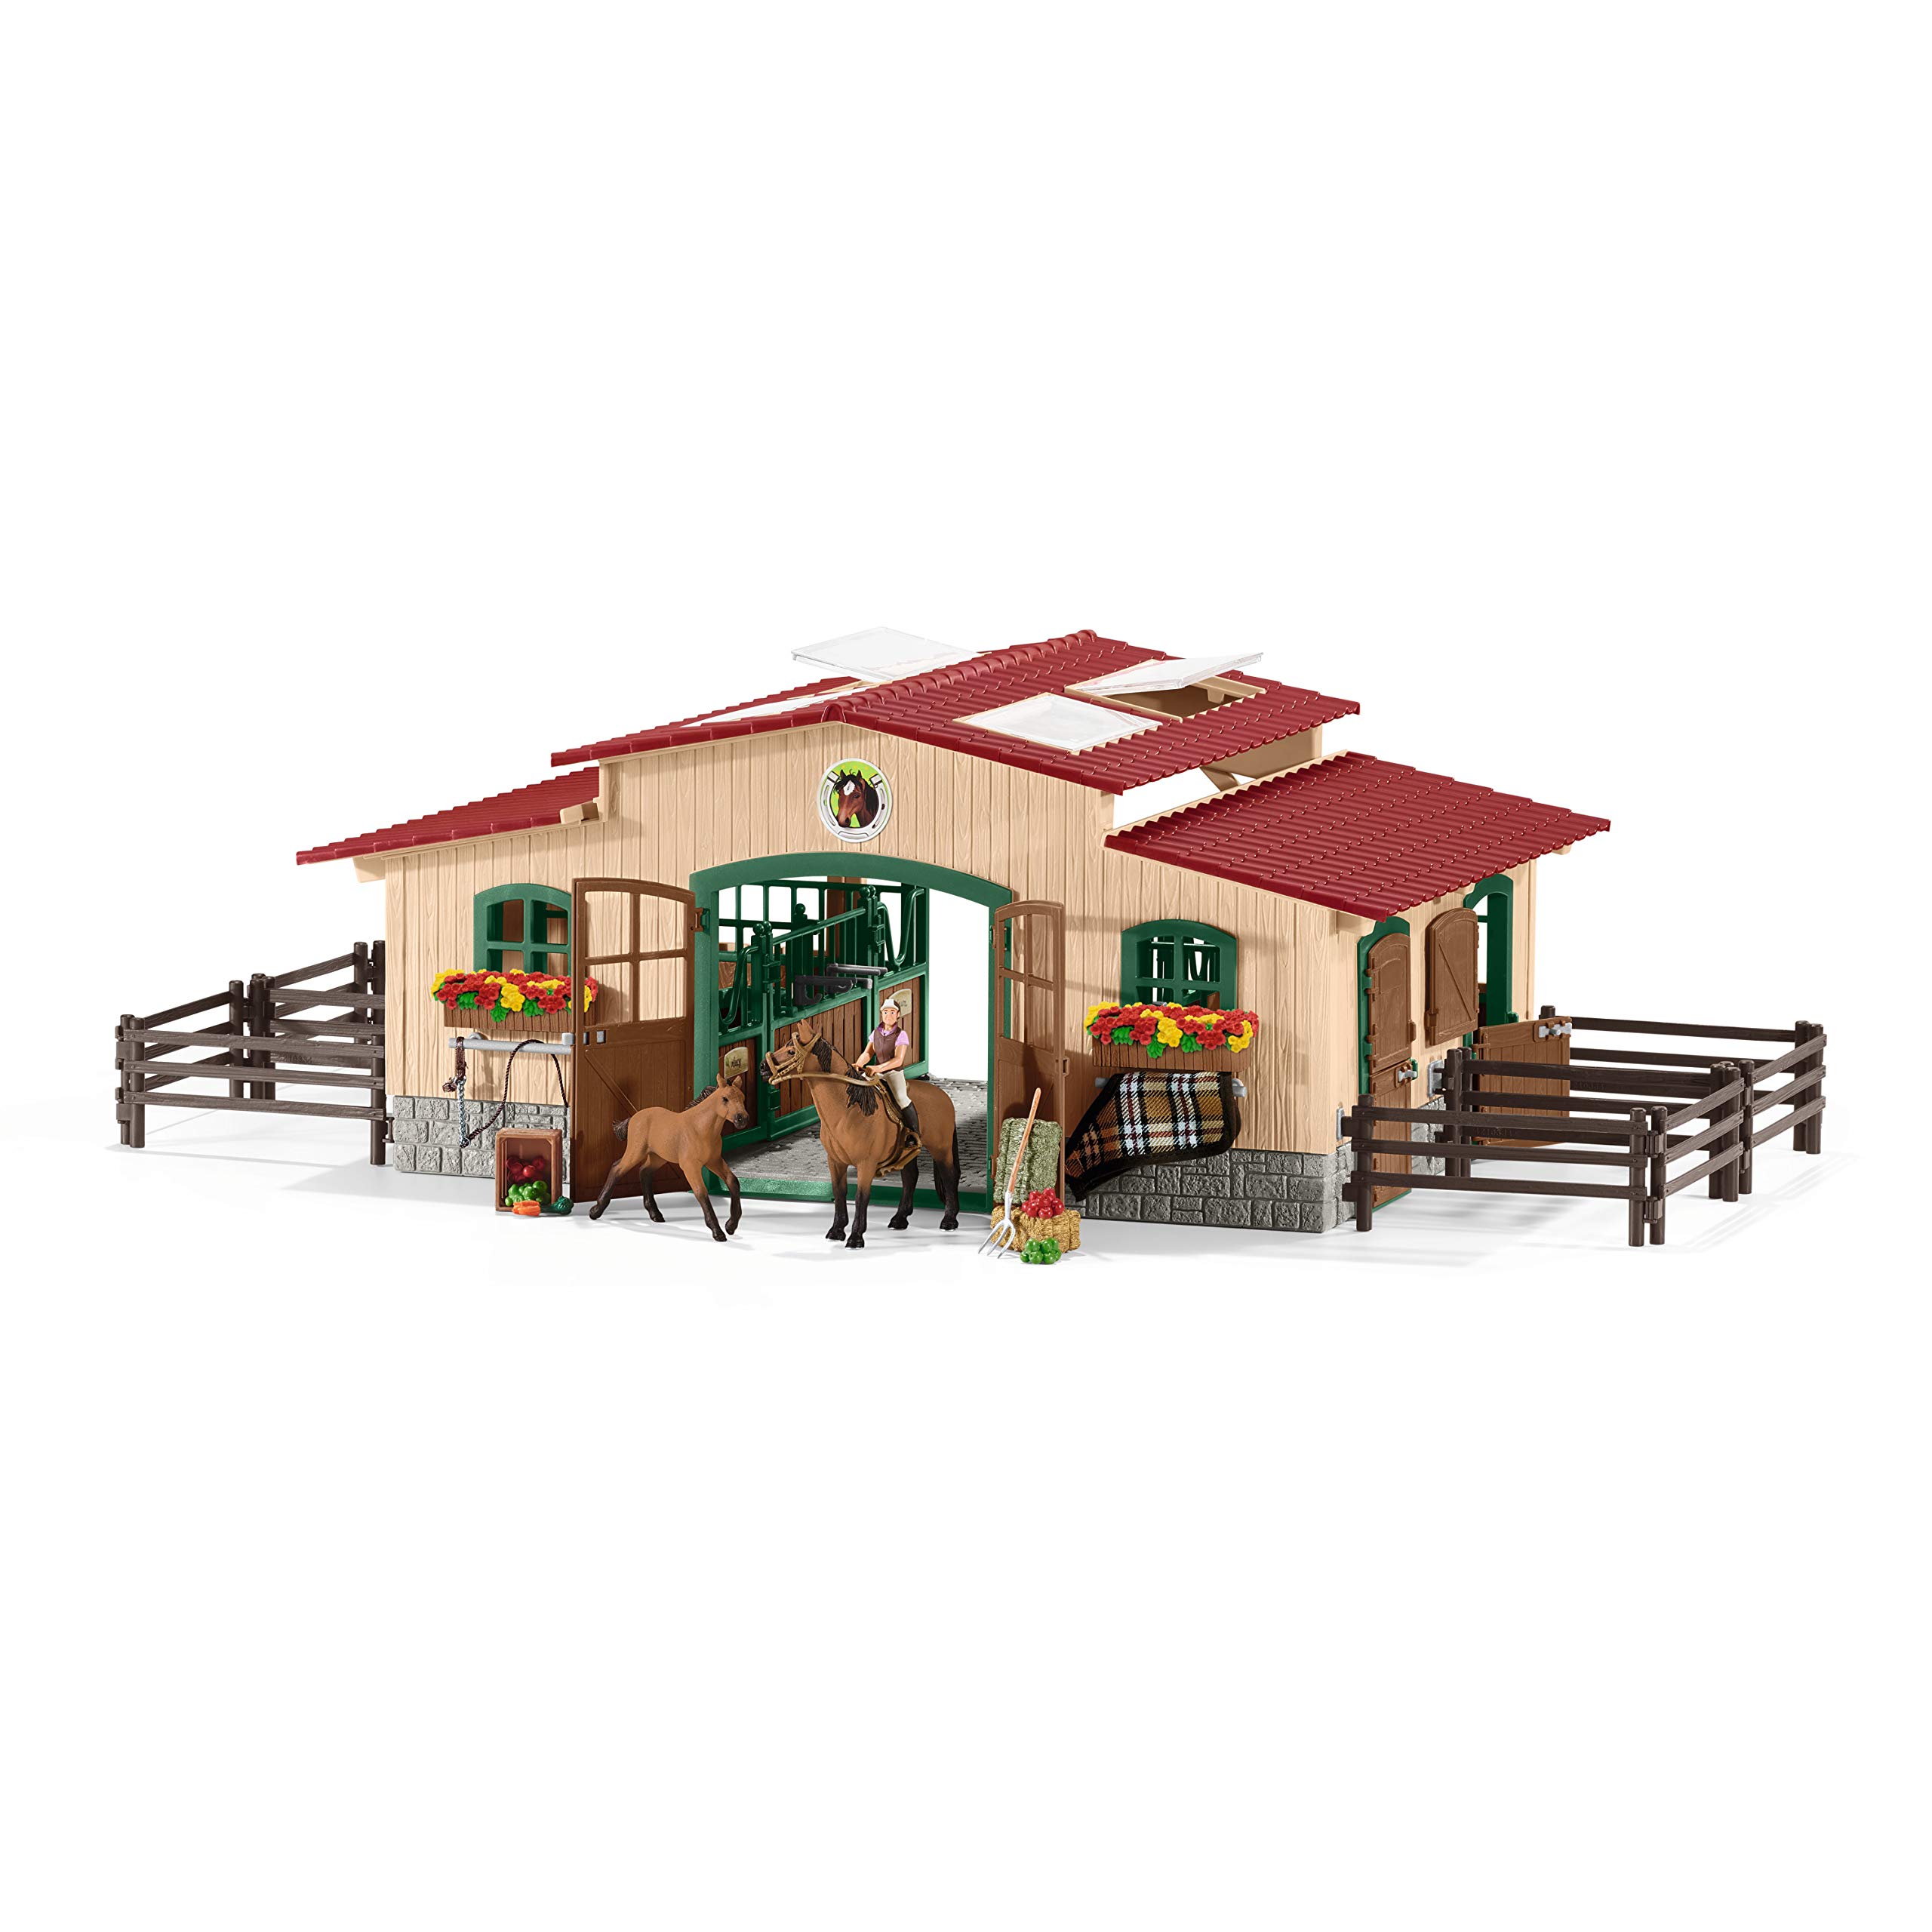 Schleich Horse Barn and Stable Playset - Award-Winning Riding Center 44 Piece Set, 2 Pony Toys, Rider Figurine, and Farm Accessories, for Girls and Boys 3 Years Old and Above